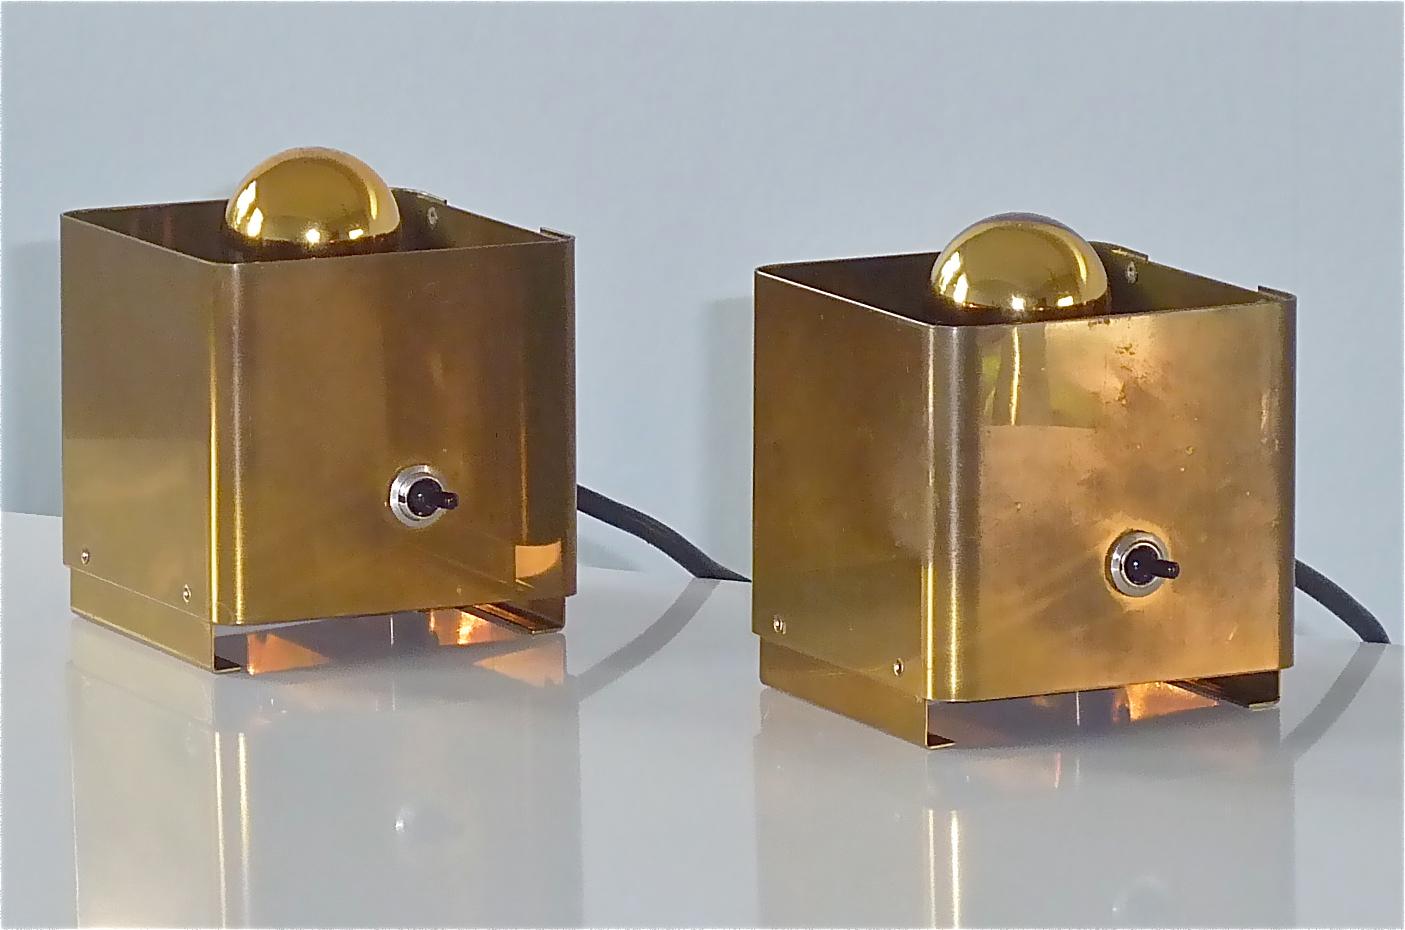 Fabulous Italian midcentury pair of patinated brass metal cube table lamps, Italy around 1960s to 1970s. The design of the lights reminds works by Gino Sarfatti for Arteluce or Gaetano Sciolari lighting. The pair cube lamps measure each 10 cm / 3.94